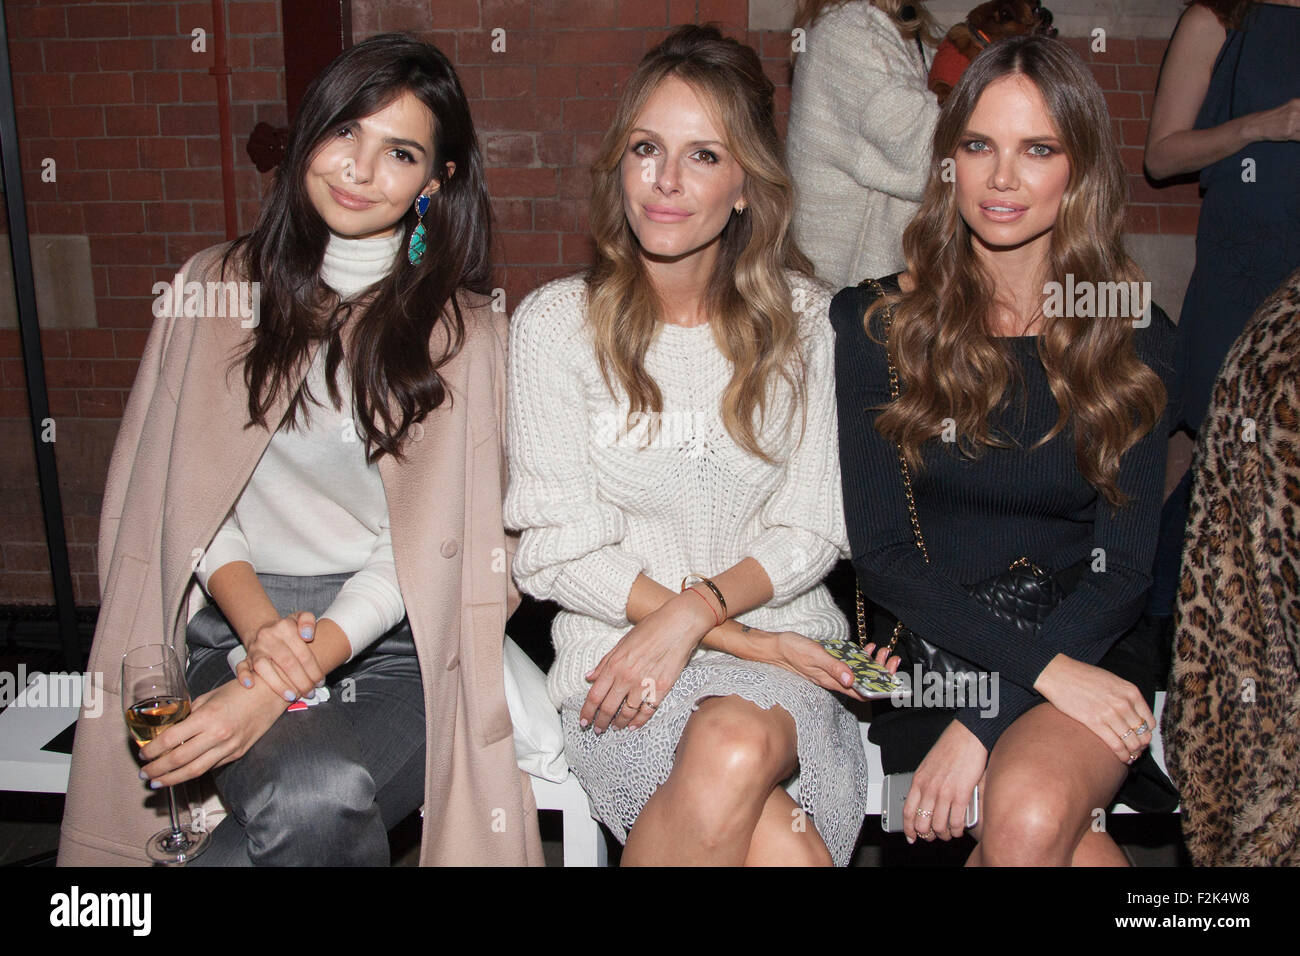 London, UK. 20th September, 2015. Front row at the London Fashion Week SS16 ready-to-wear runway show of label Pringle of Scotland at the St Pancras Renaissance Hotel. Credit:  Vibrant Pictures/Alamy Live News Stock Photo